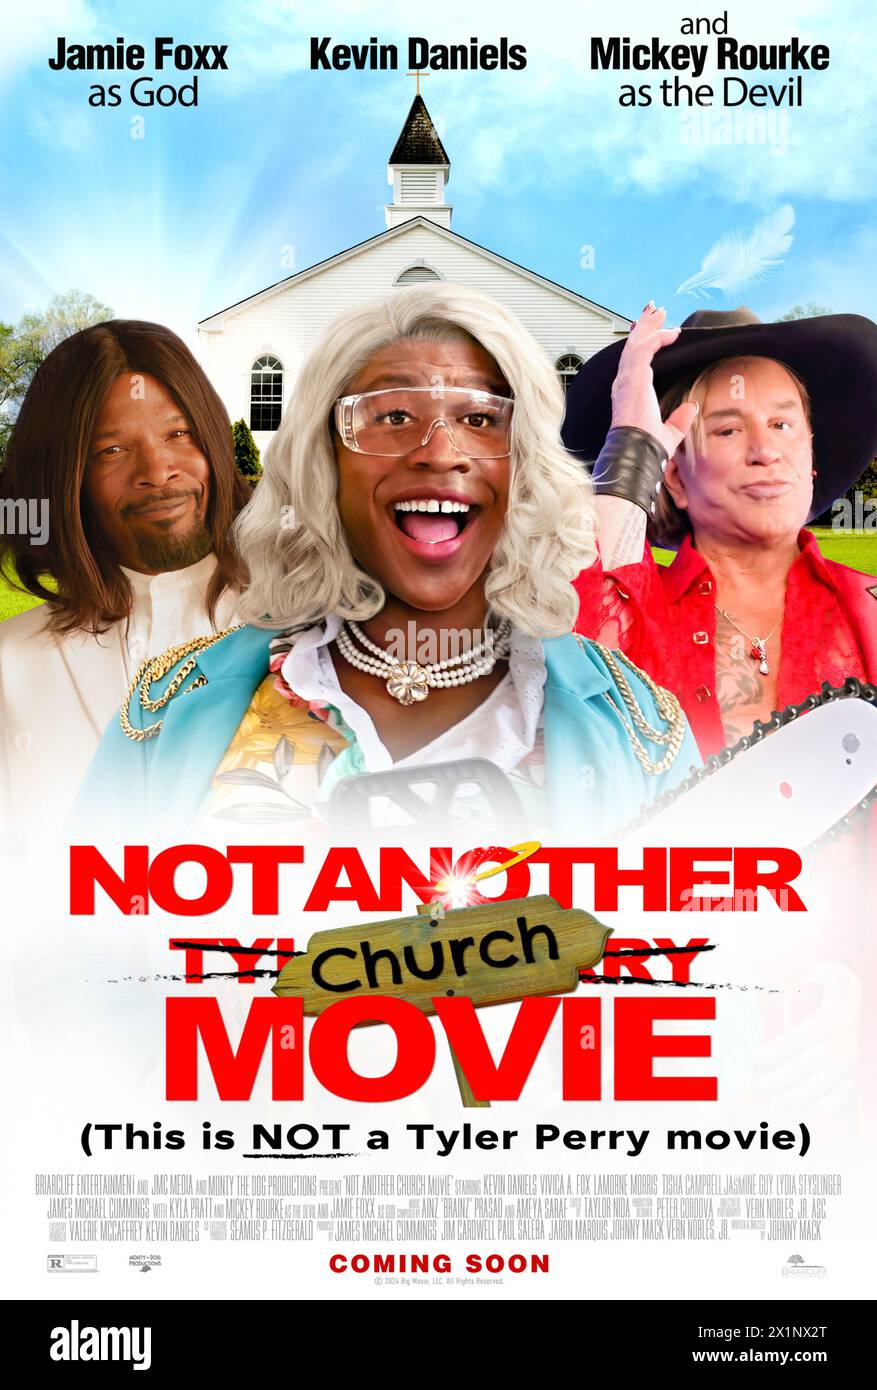 Not Another Church Movie (2024) directed by James Michael Cummings and Johnny Mack and starring Mickey Rourke, Lamorne Morris and Jamie Foxx. Taylor Pherry (NOT Tyler Perry) is on a mission from God to tell his family's stories and inspire his community in this spoof comedy. US one sheet poster.***EDITORIAL USE ONLY*** Credit: BFA / Briarcliff Entertainment Stock Photo